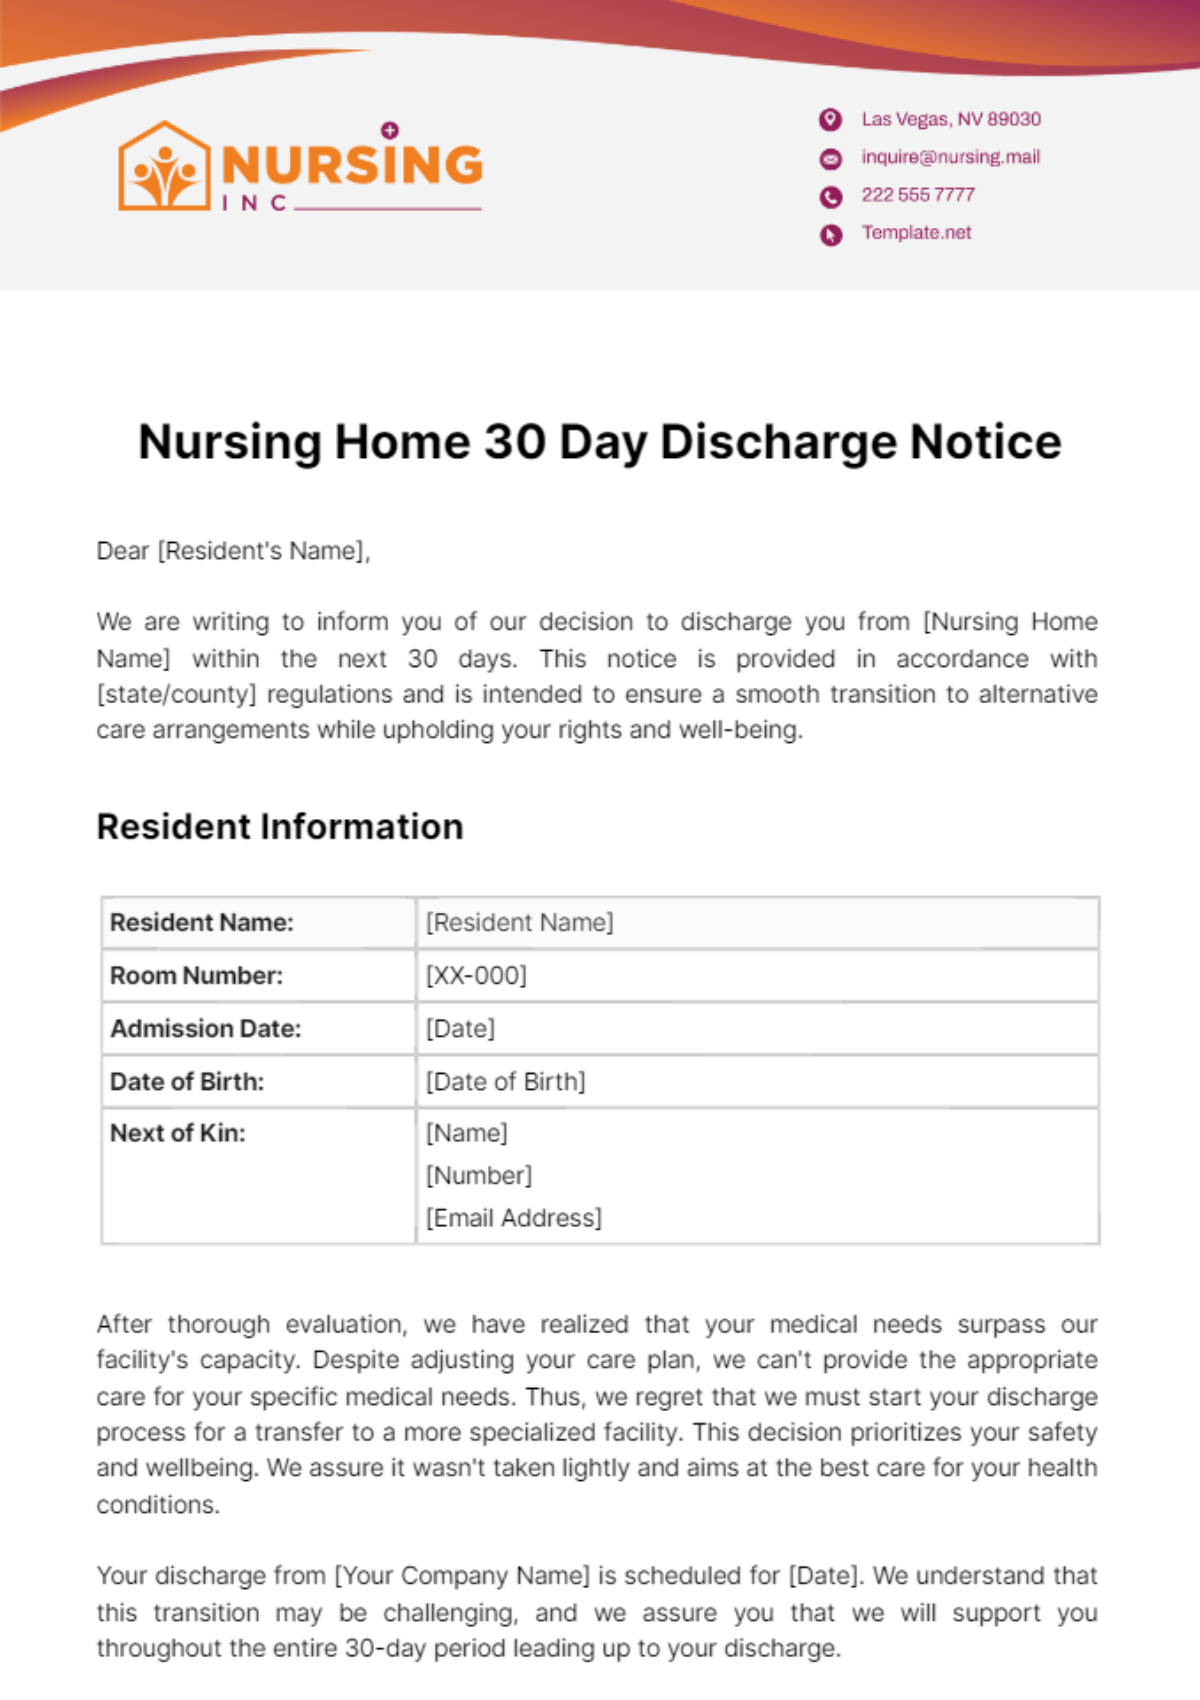 Nursing Home 30 Day Discharge Notice Template